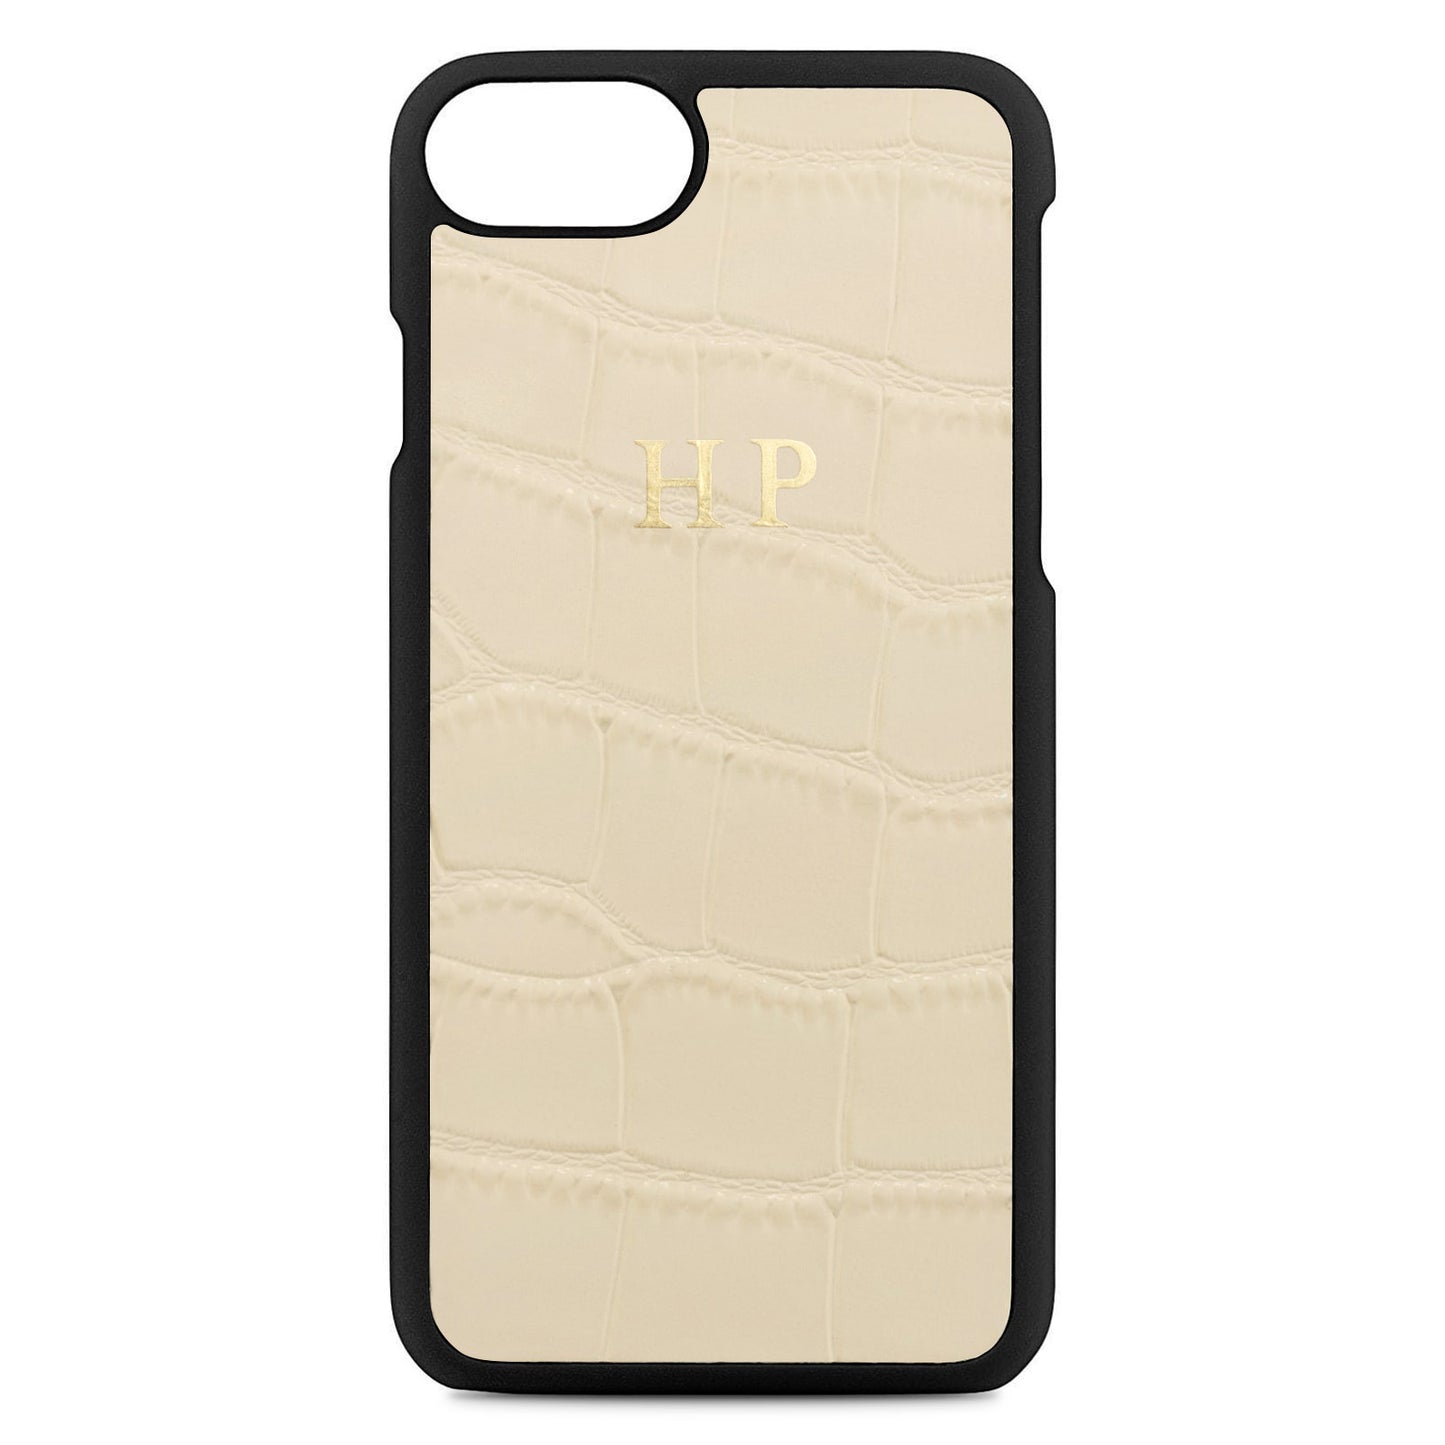 Personalised Ivory Croc Leather iPhone Case